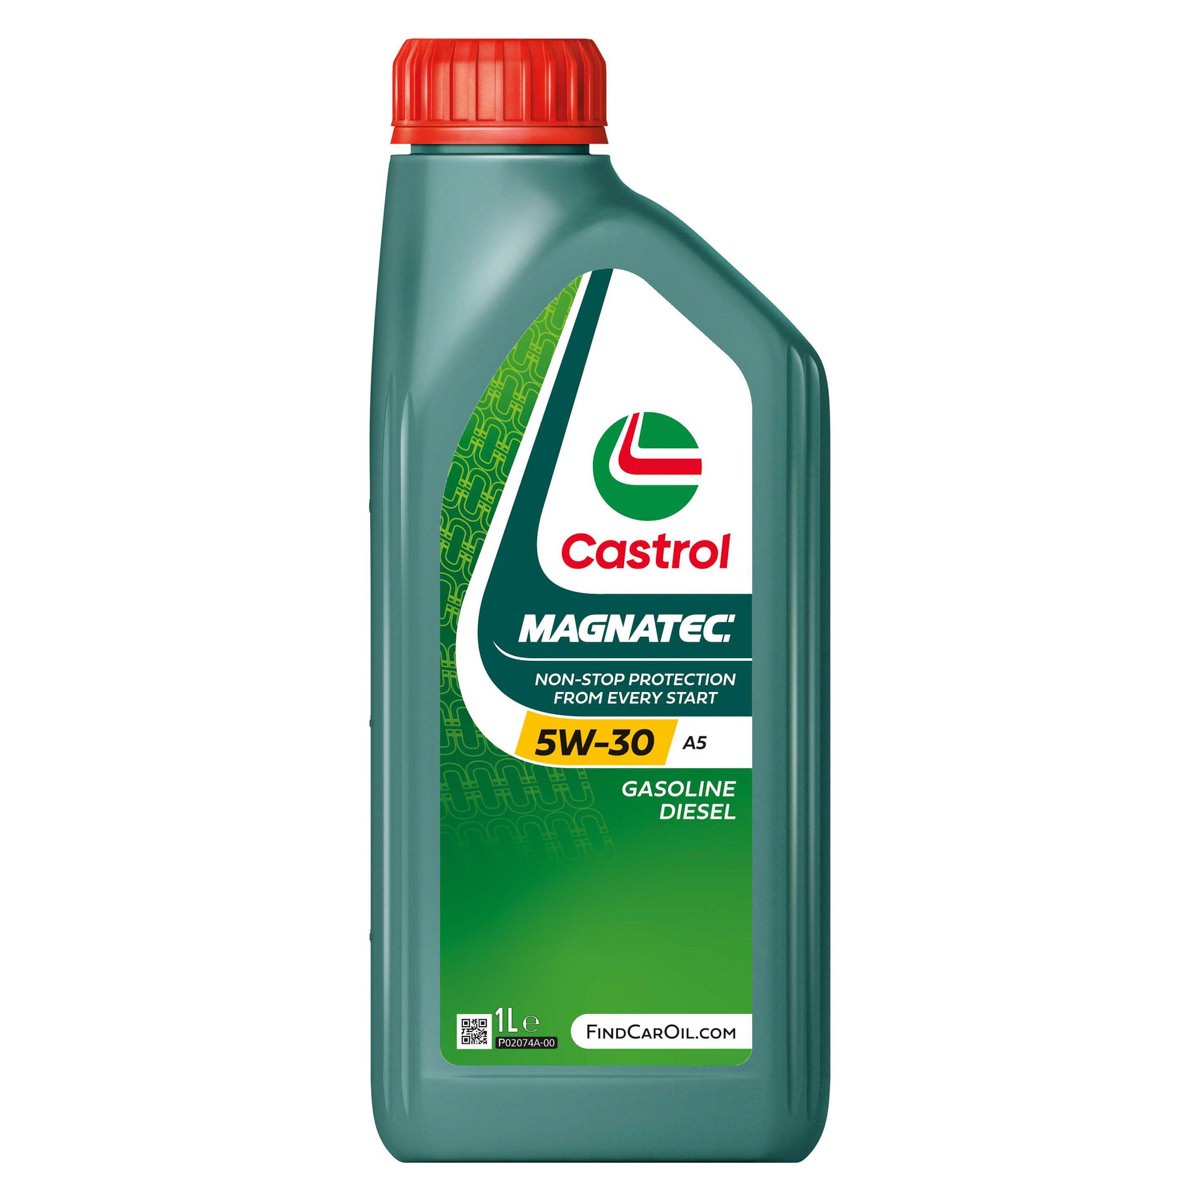 CASTROL Huile moteur BMW,OPEL,FORD 15F903 Huile